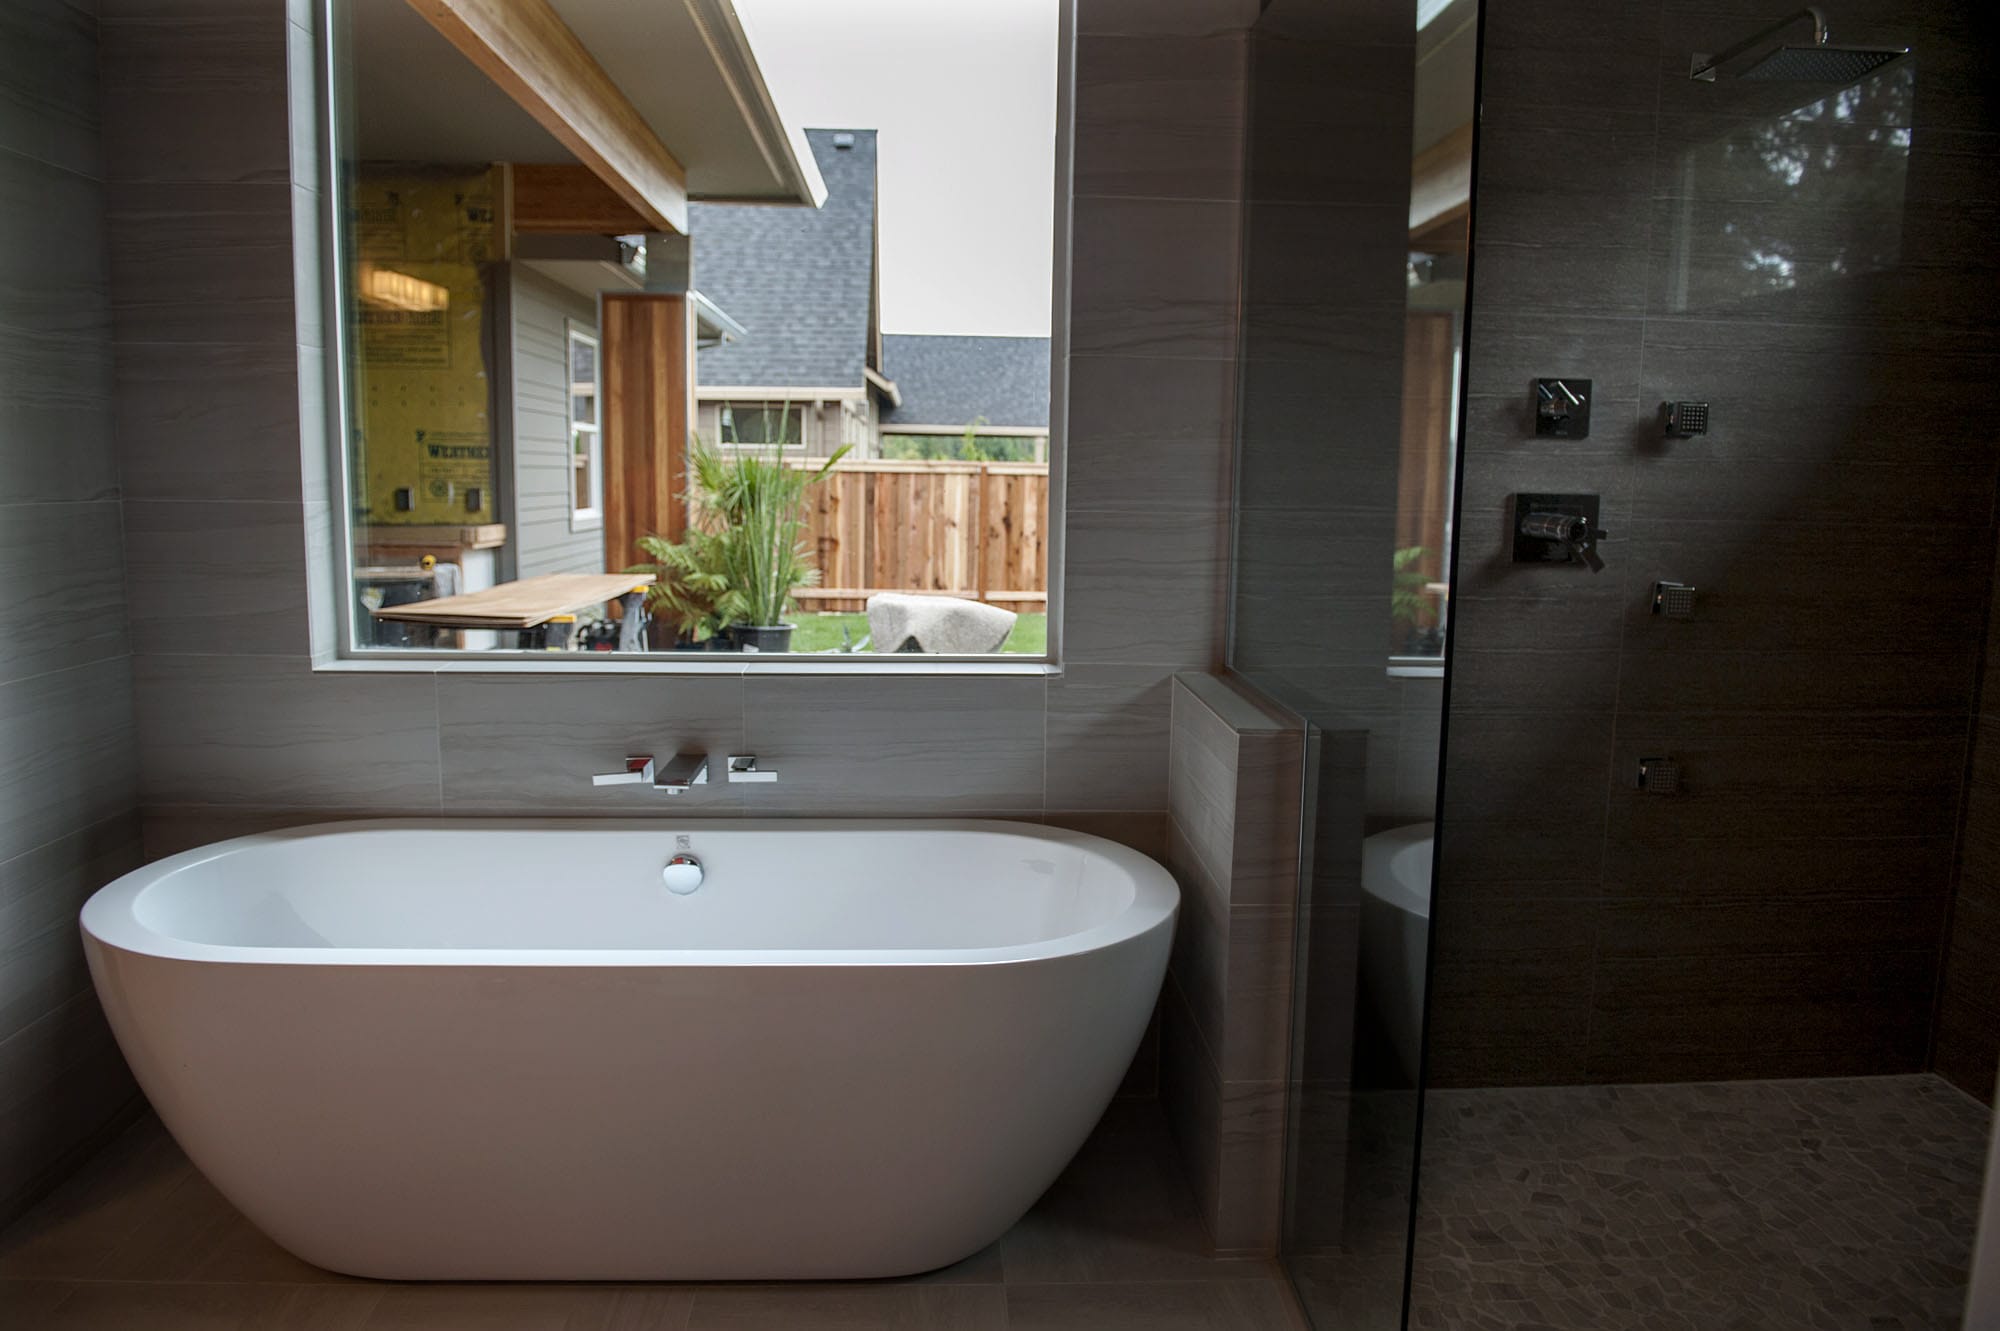 The master bathroom in The Hyfield hosts a bathtub, shower and views of the backyard.